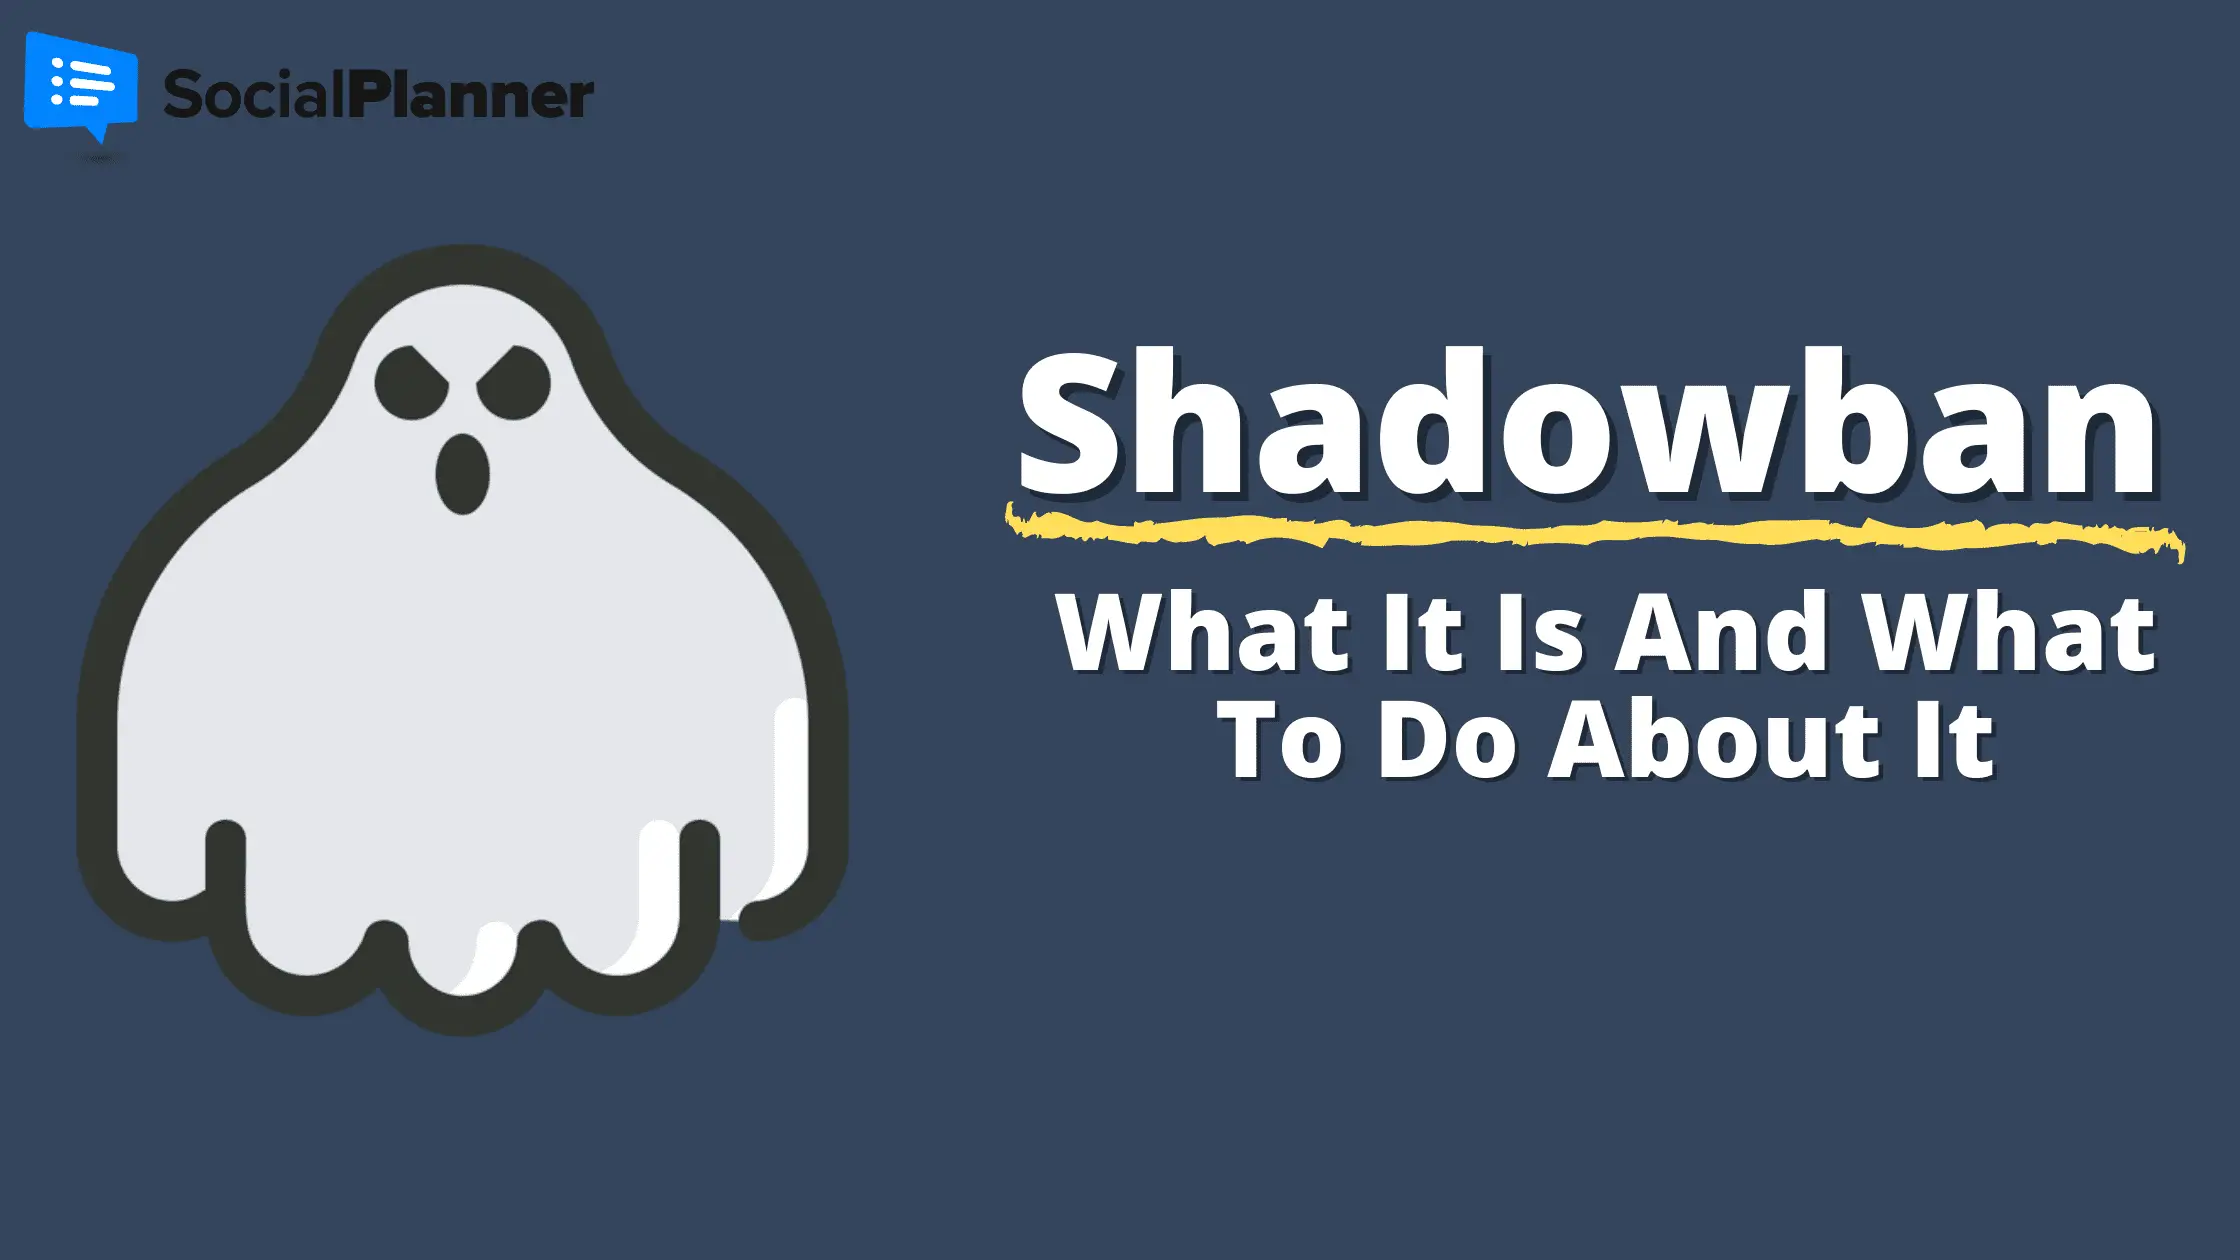 Shadowban - what is it and what to do about it